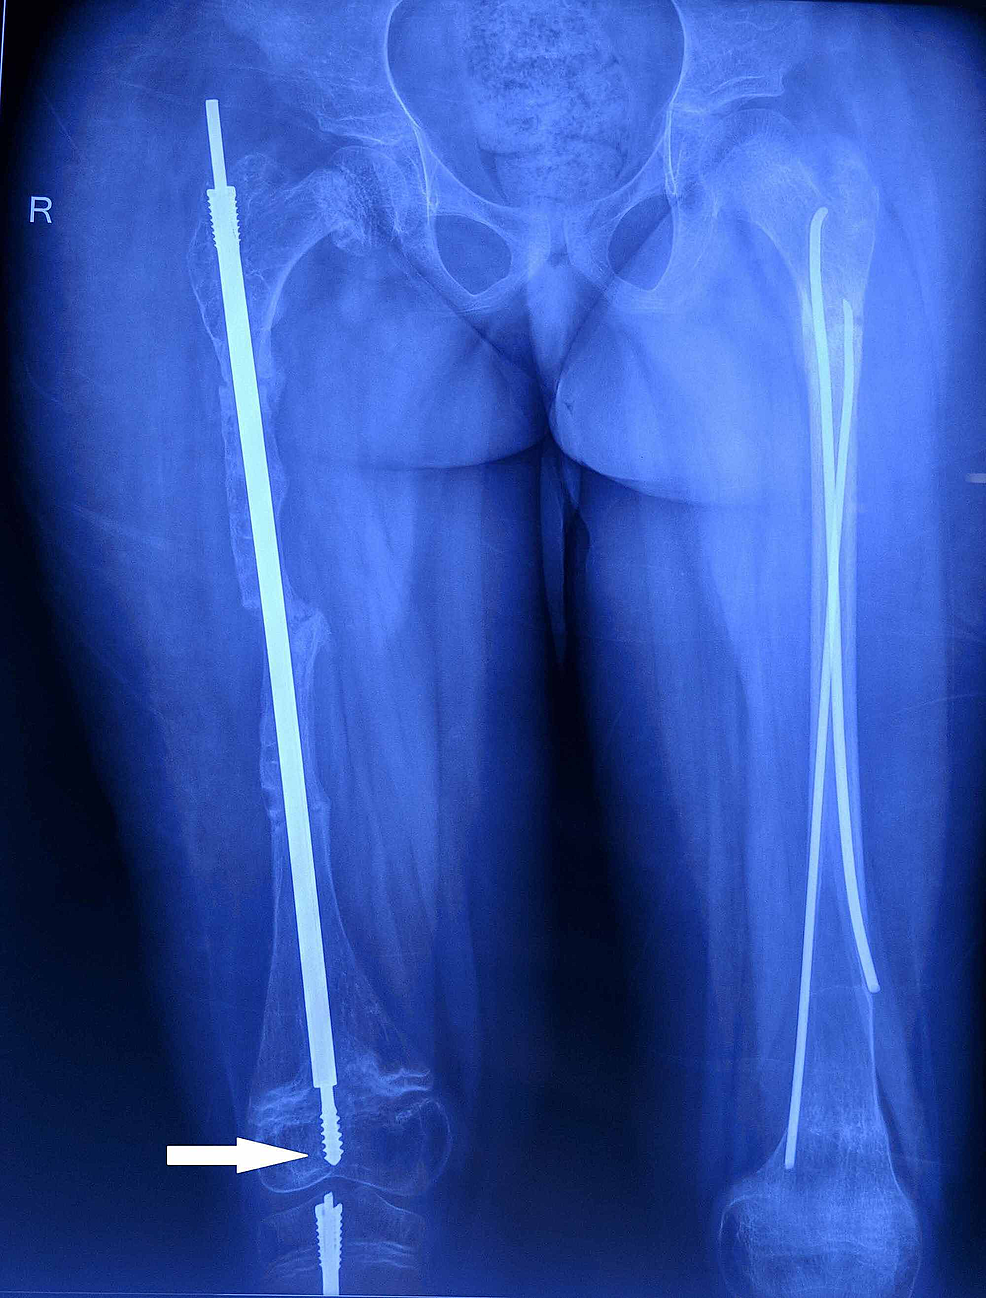 Follow-up-radiograph-of-the-right-femur